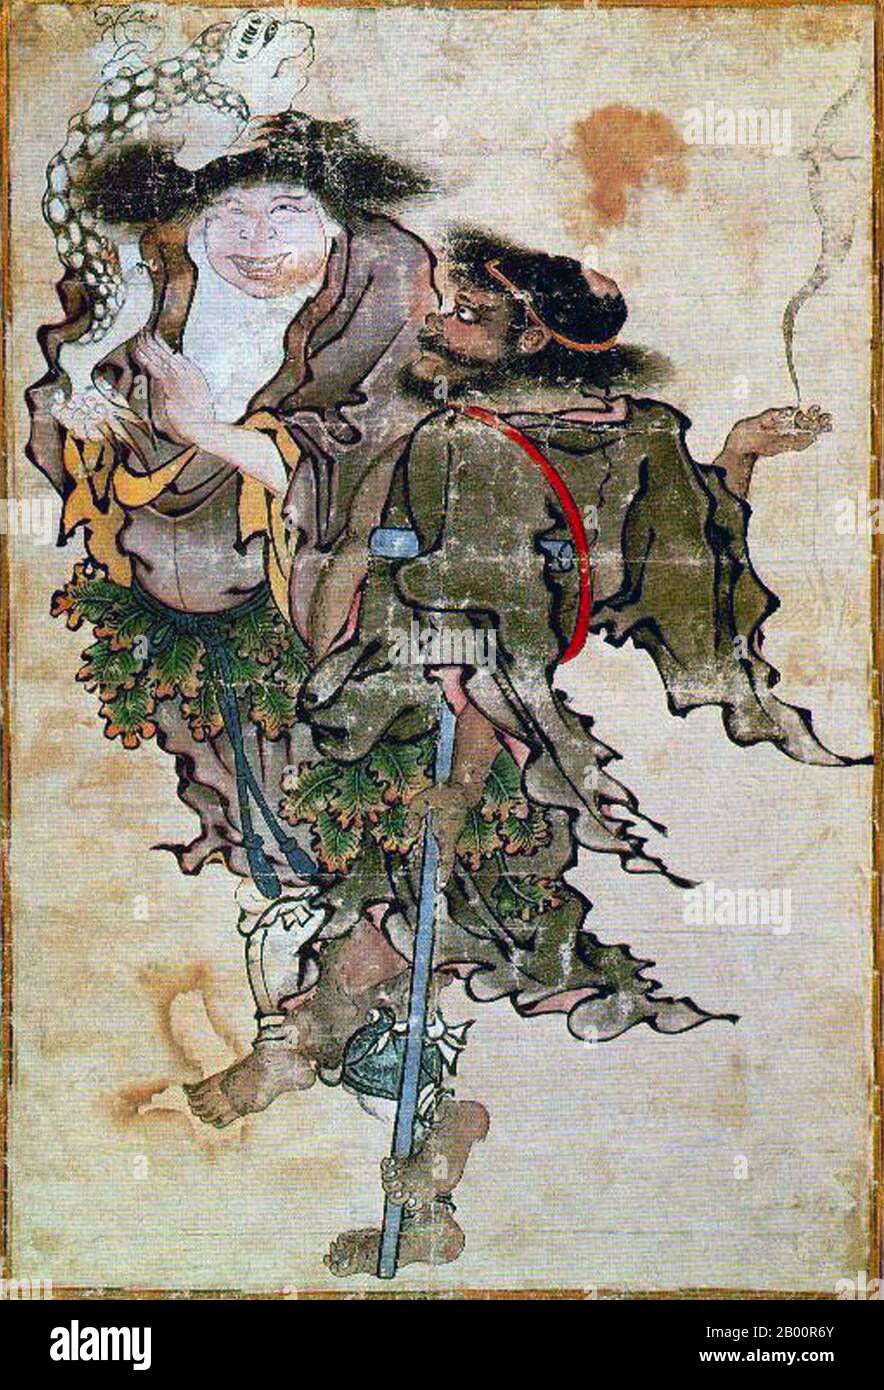 Central Asia: Siyah Kalem School, 15th century: Two Chinese-inspired figures, possibly Daoist immortals.  Siyah Kalem or 'Black Pen' is the name given to the 15th century school of painting attributed to Mehmed Siyah Kalem. Nothing is known of his life, but his work indicates that he was of Central Asian Turkic origin, and thoroughly familiar with camp and military life. The paintings appear in the 'Conqueror’s Albums', so named because two portraits of Sultan Mehmed II the Conqueror are present in one of them. Stock Photo